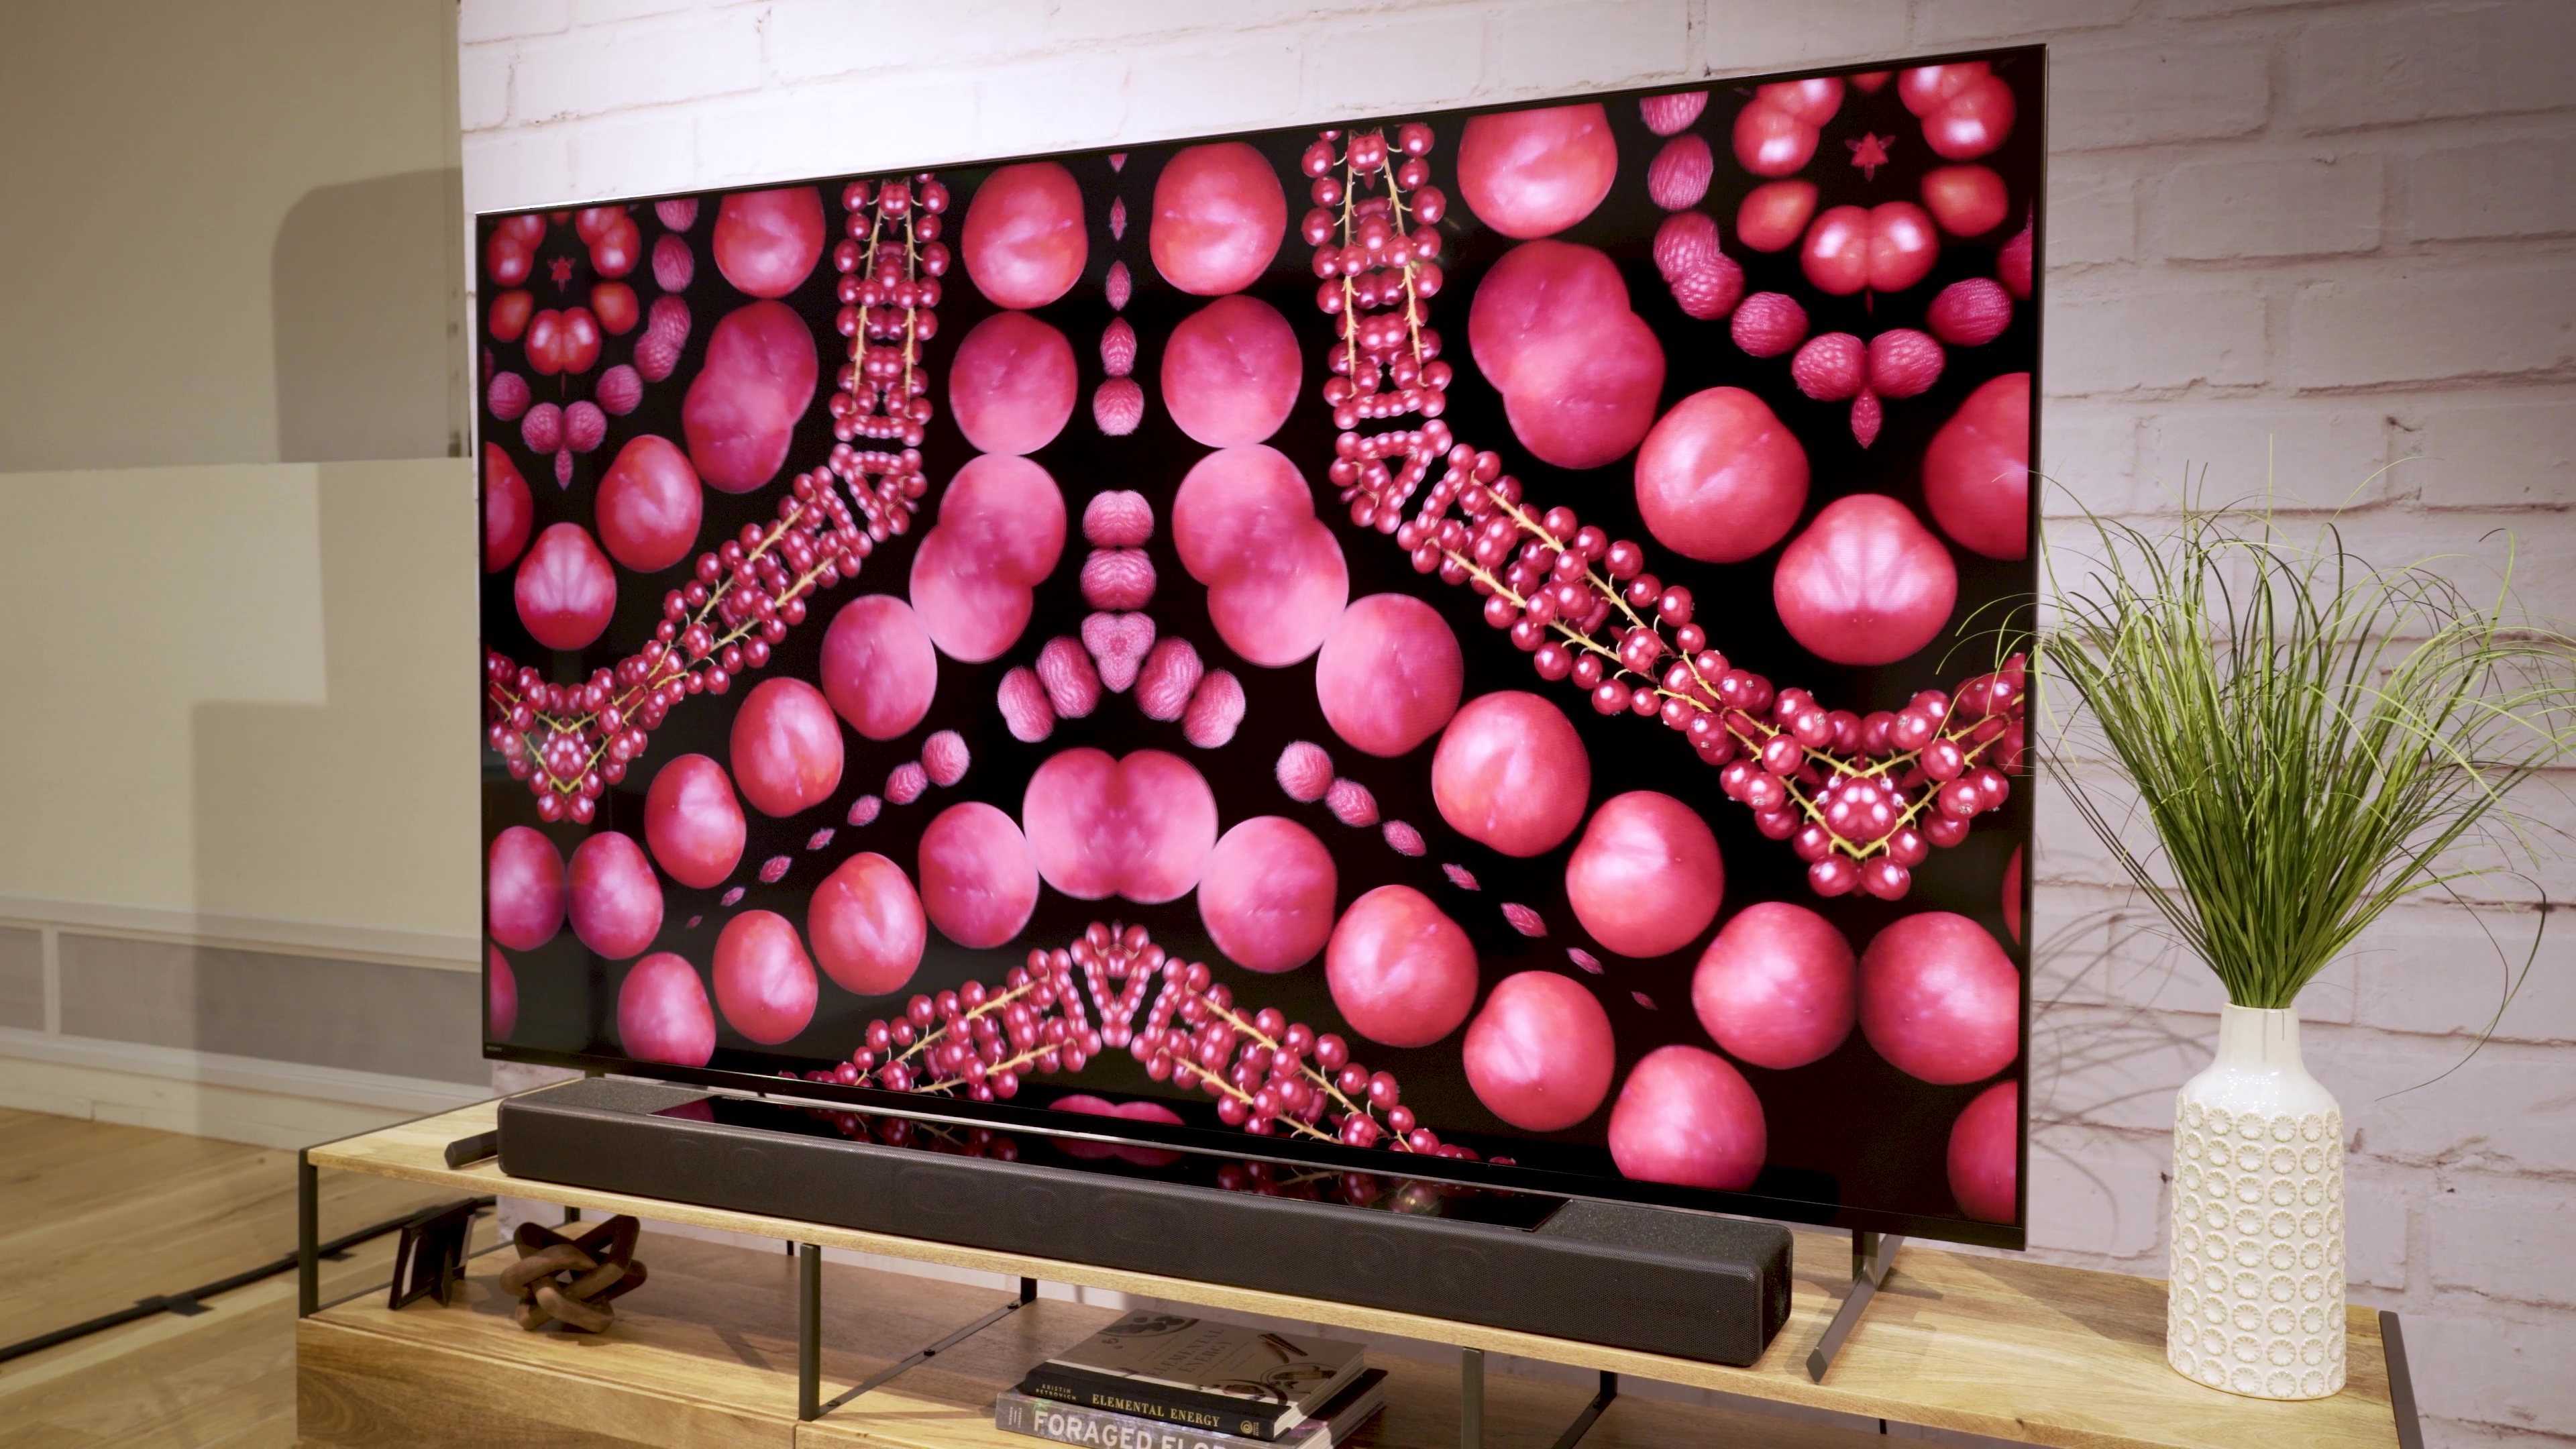 Sony Bravia X80K TV Review: Sony's entry-level LED TV has flagship